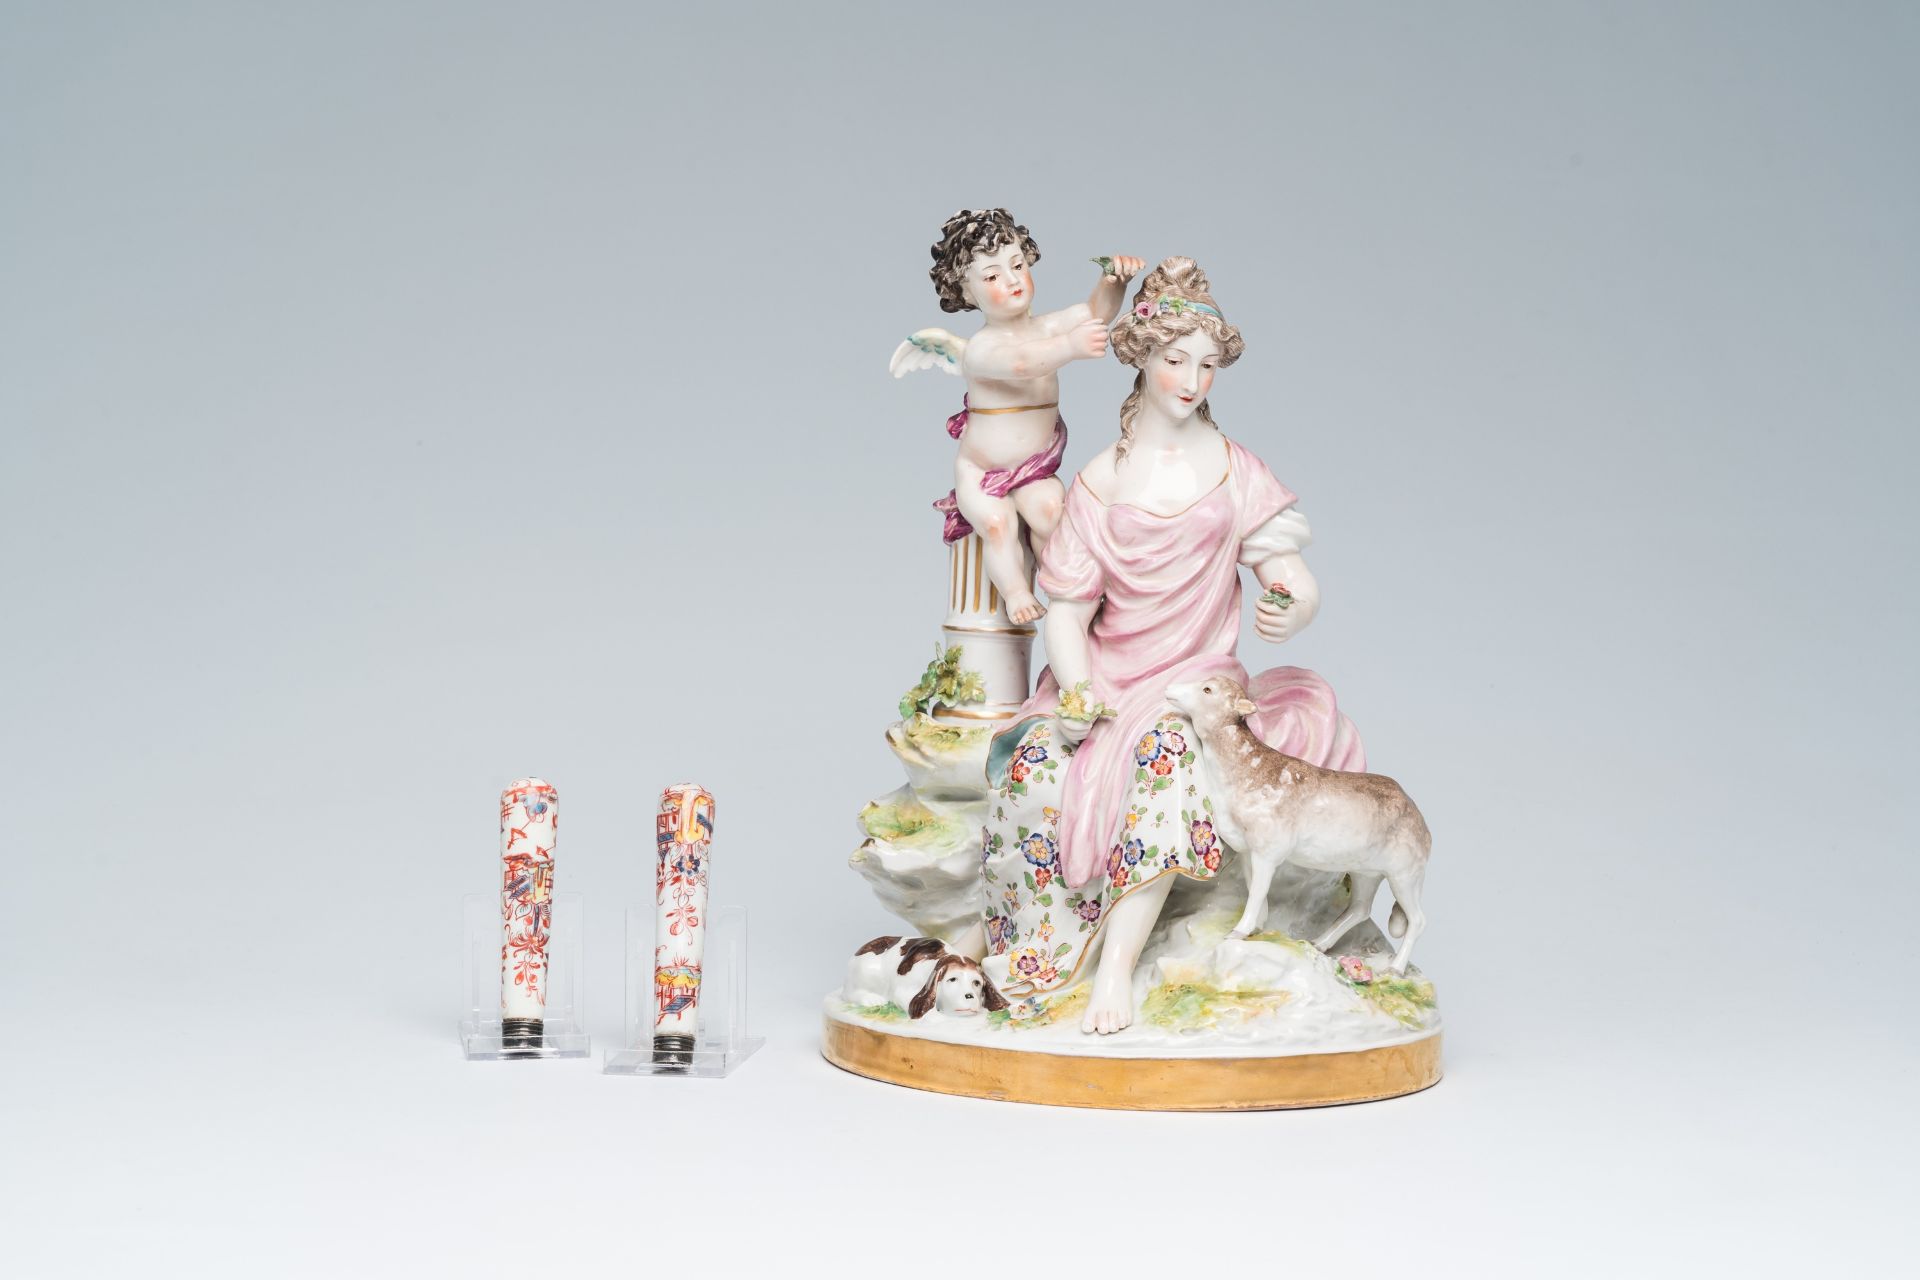 A pair of French polychrome Mennecy knife handles and a Saxon porcelain group with a lady and an ang